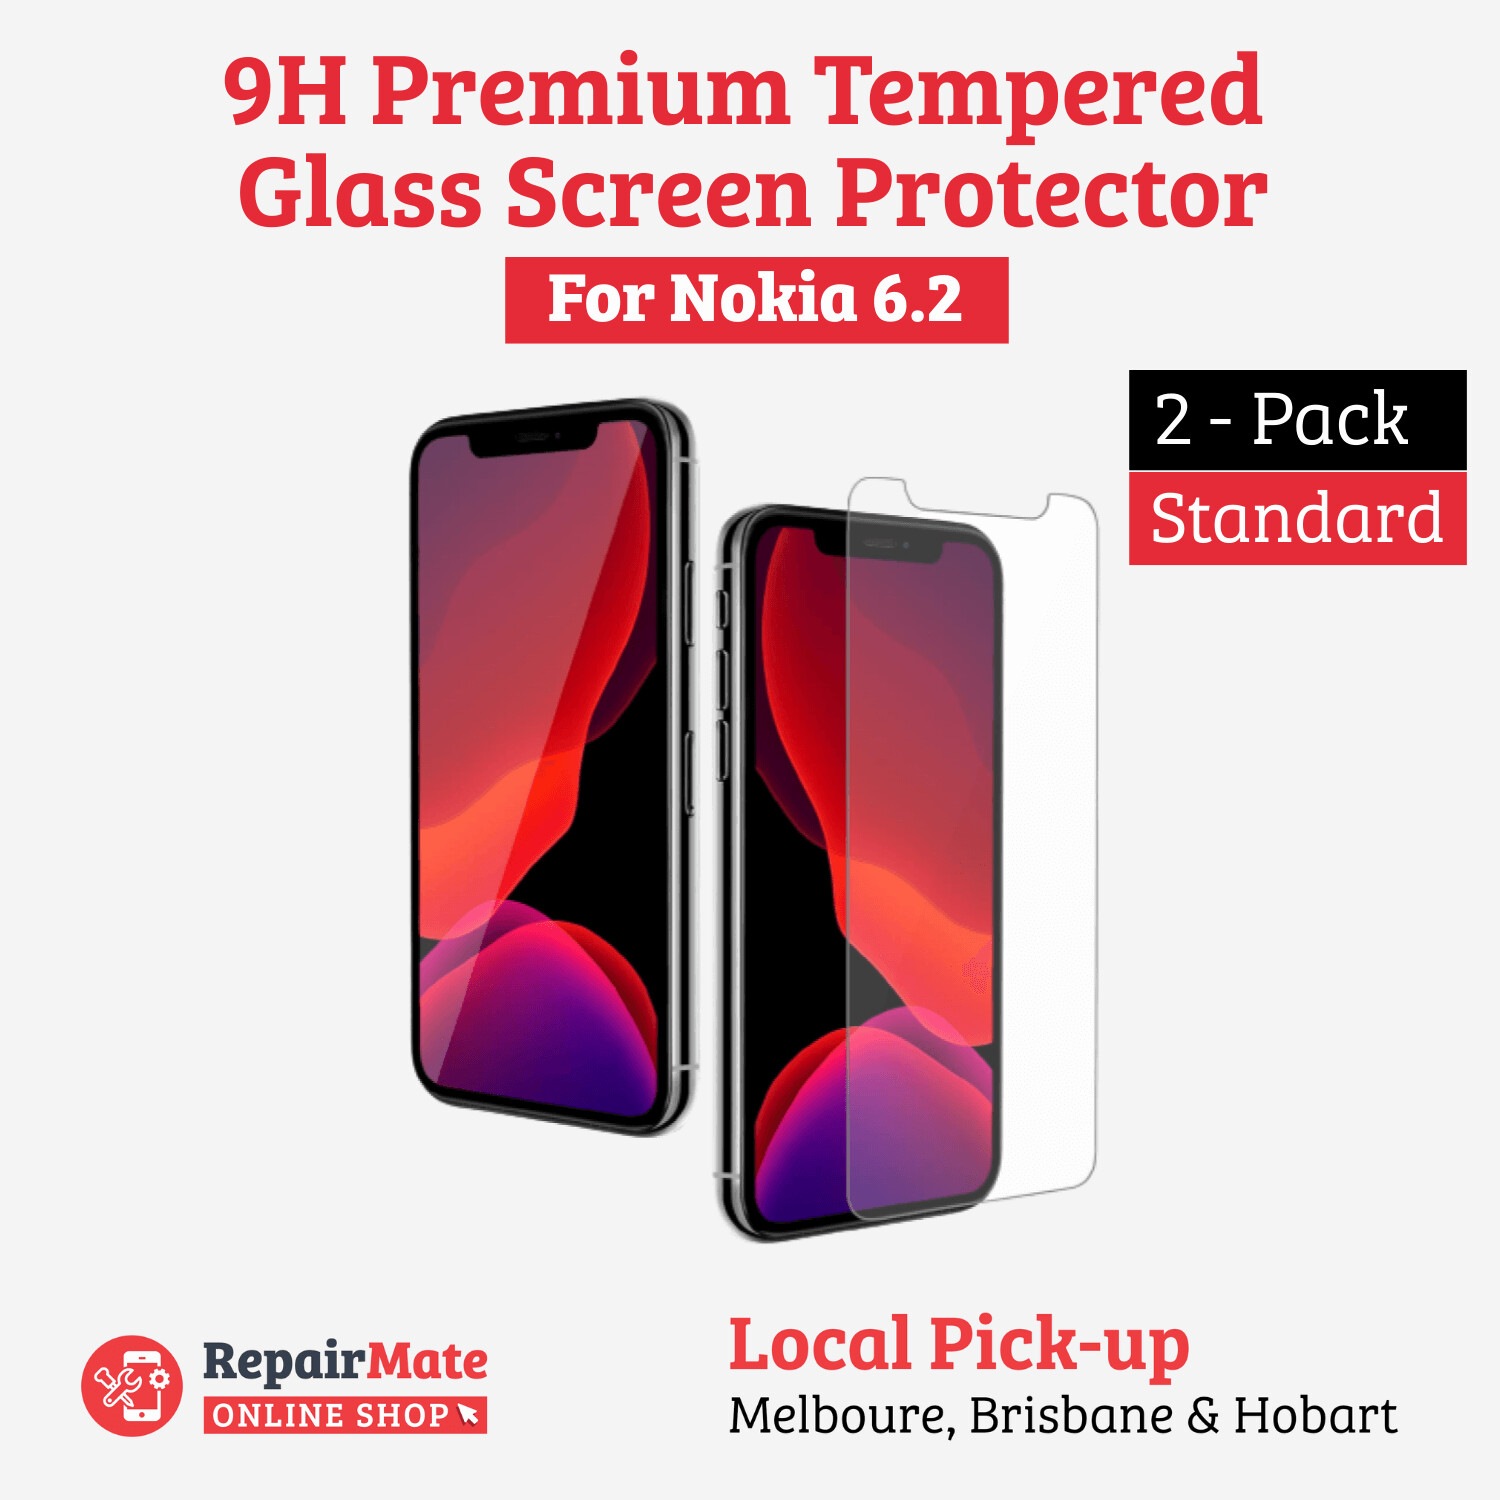 Nokia 6.2 9H Premium Tempered Glass Screen Protector [2 Pack]